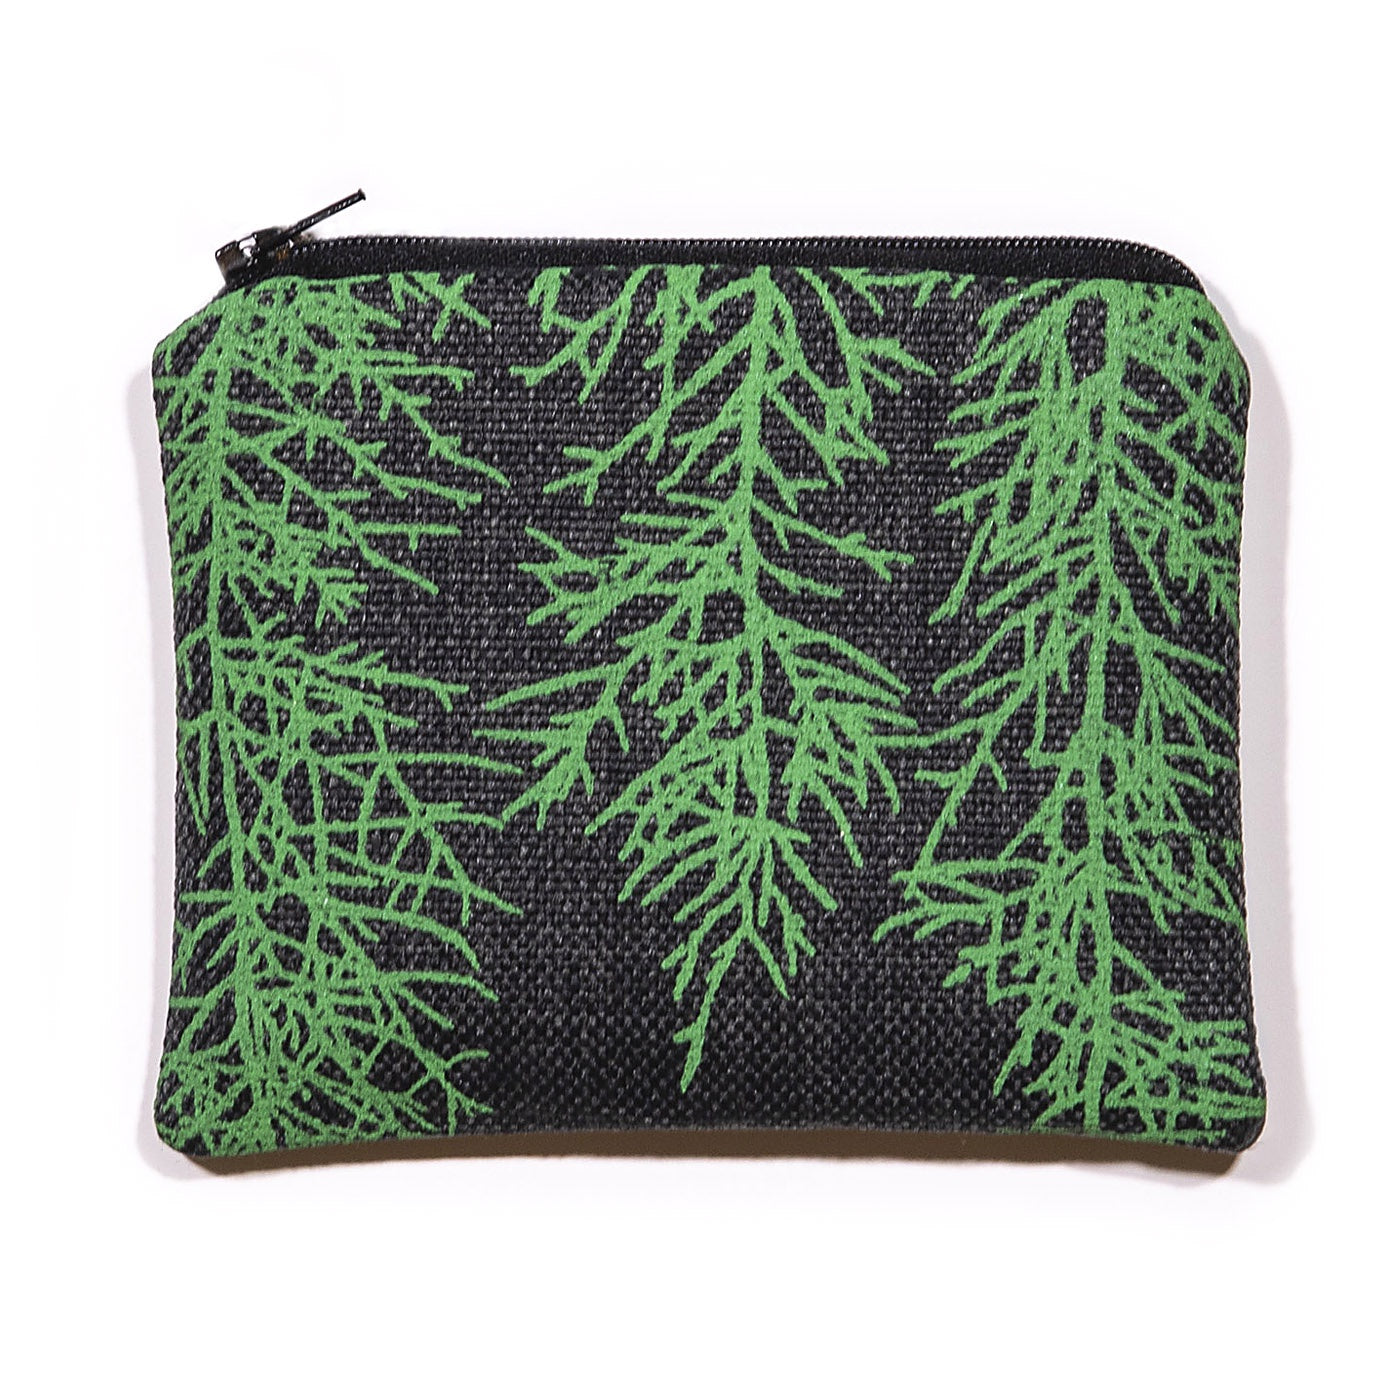 Stalley Textile Co - Zip Purse - Small - Huon Pine - Green on Charcoal